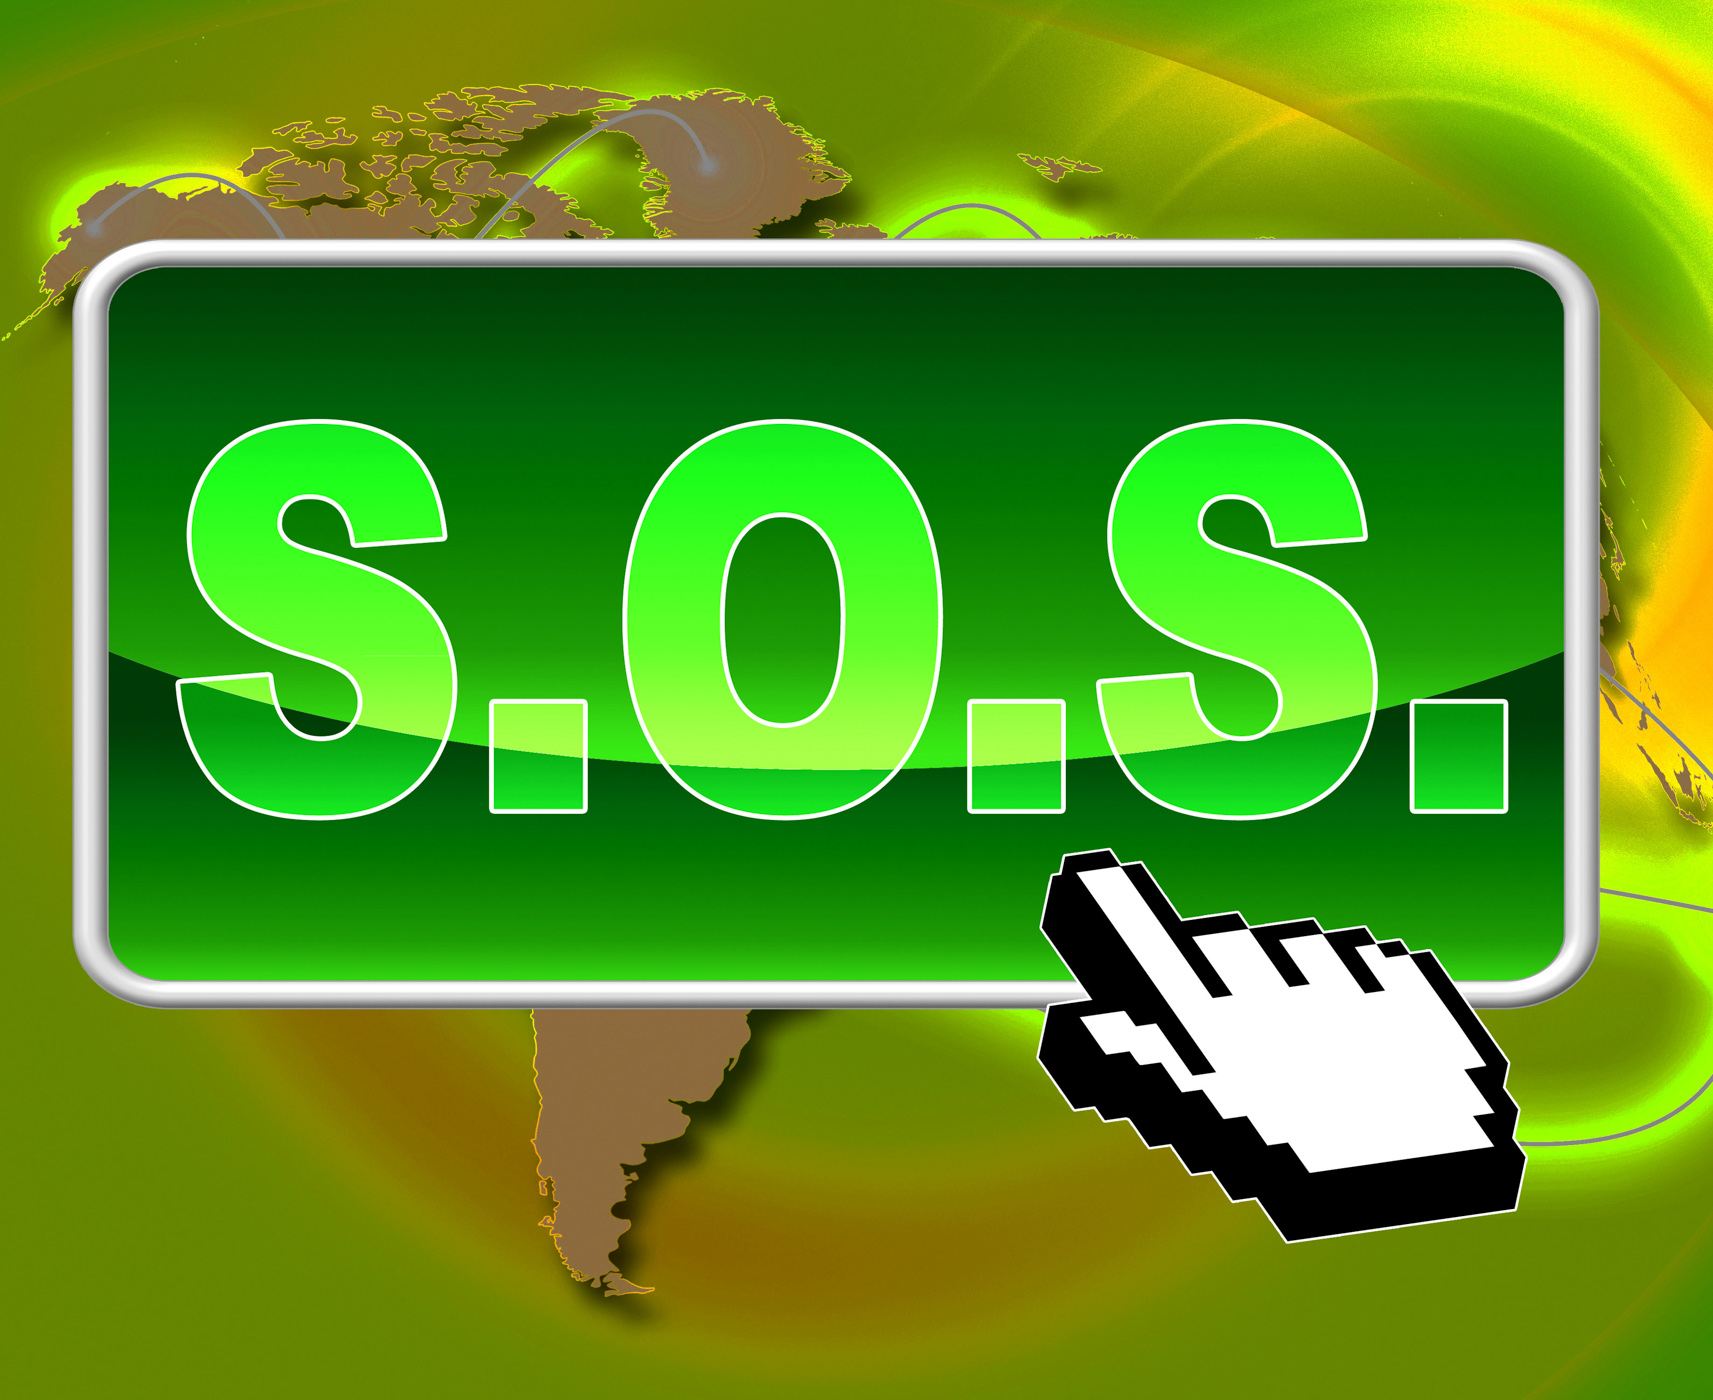 Sos button indicates world wide web and support photo